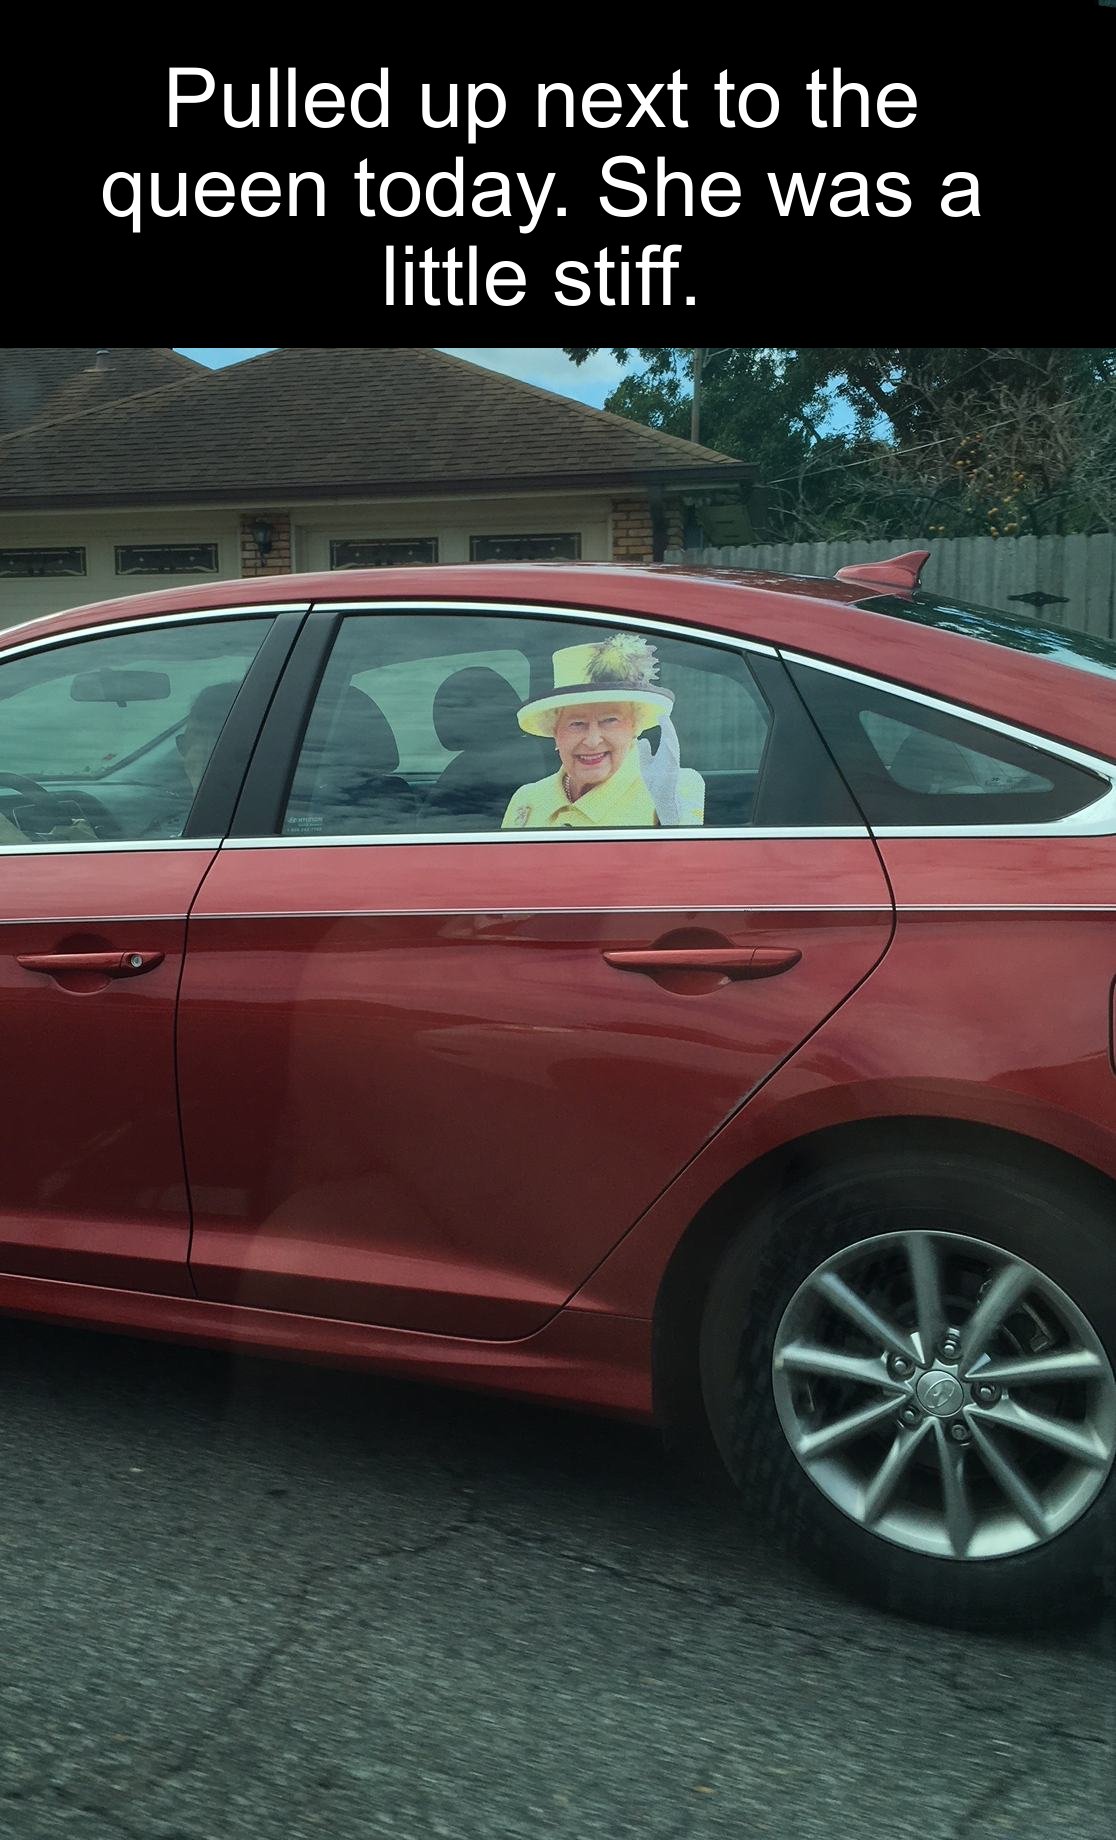 dank memes - car memes - family car - Pulled up next to the queen today. She was a little stiff. 1